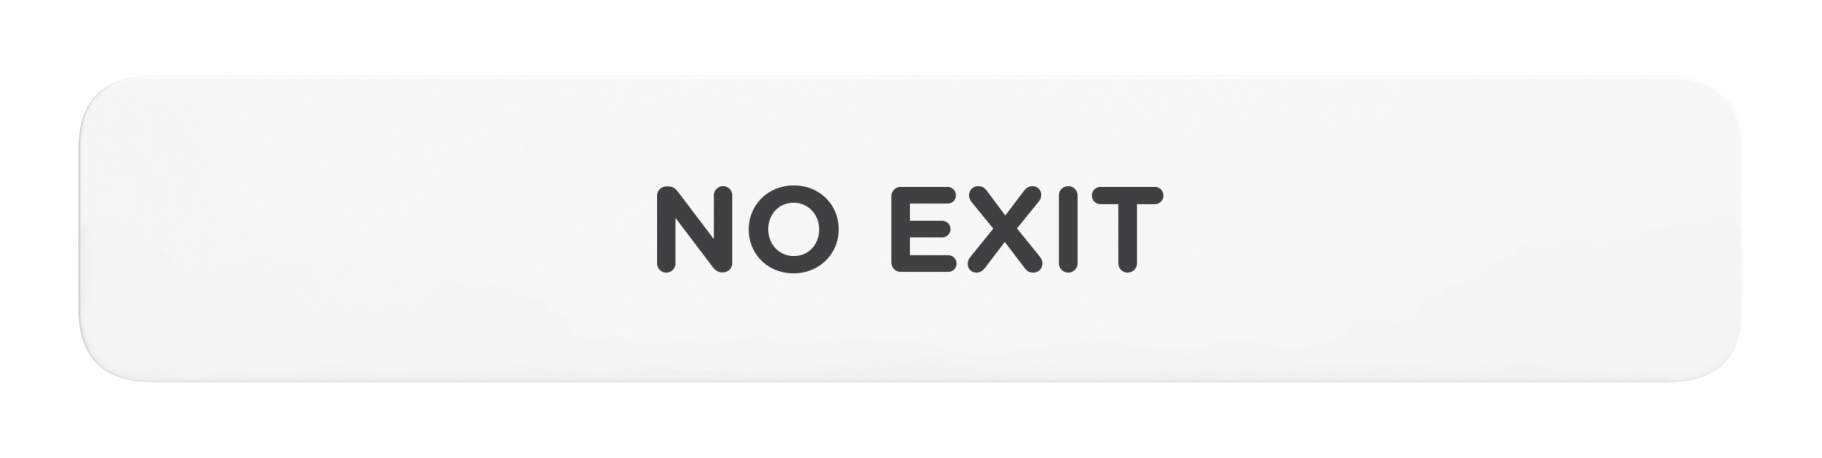 No Exit_Sign_Door_Wall Mount Sign_8x1.5_6mm Thick Solid Surface Sign with Inlay Resins_Self Adhesive